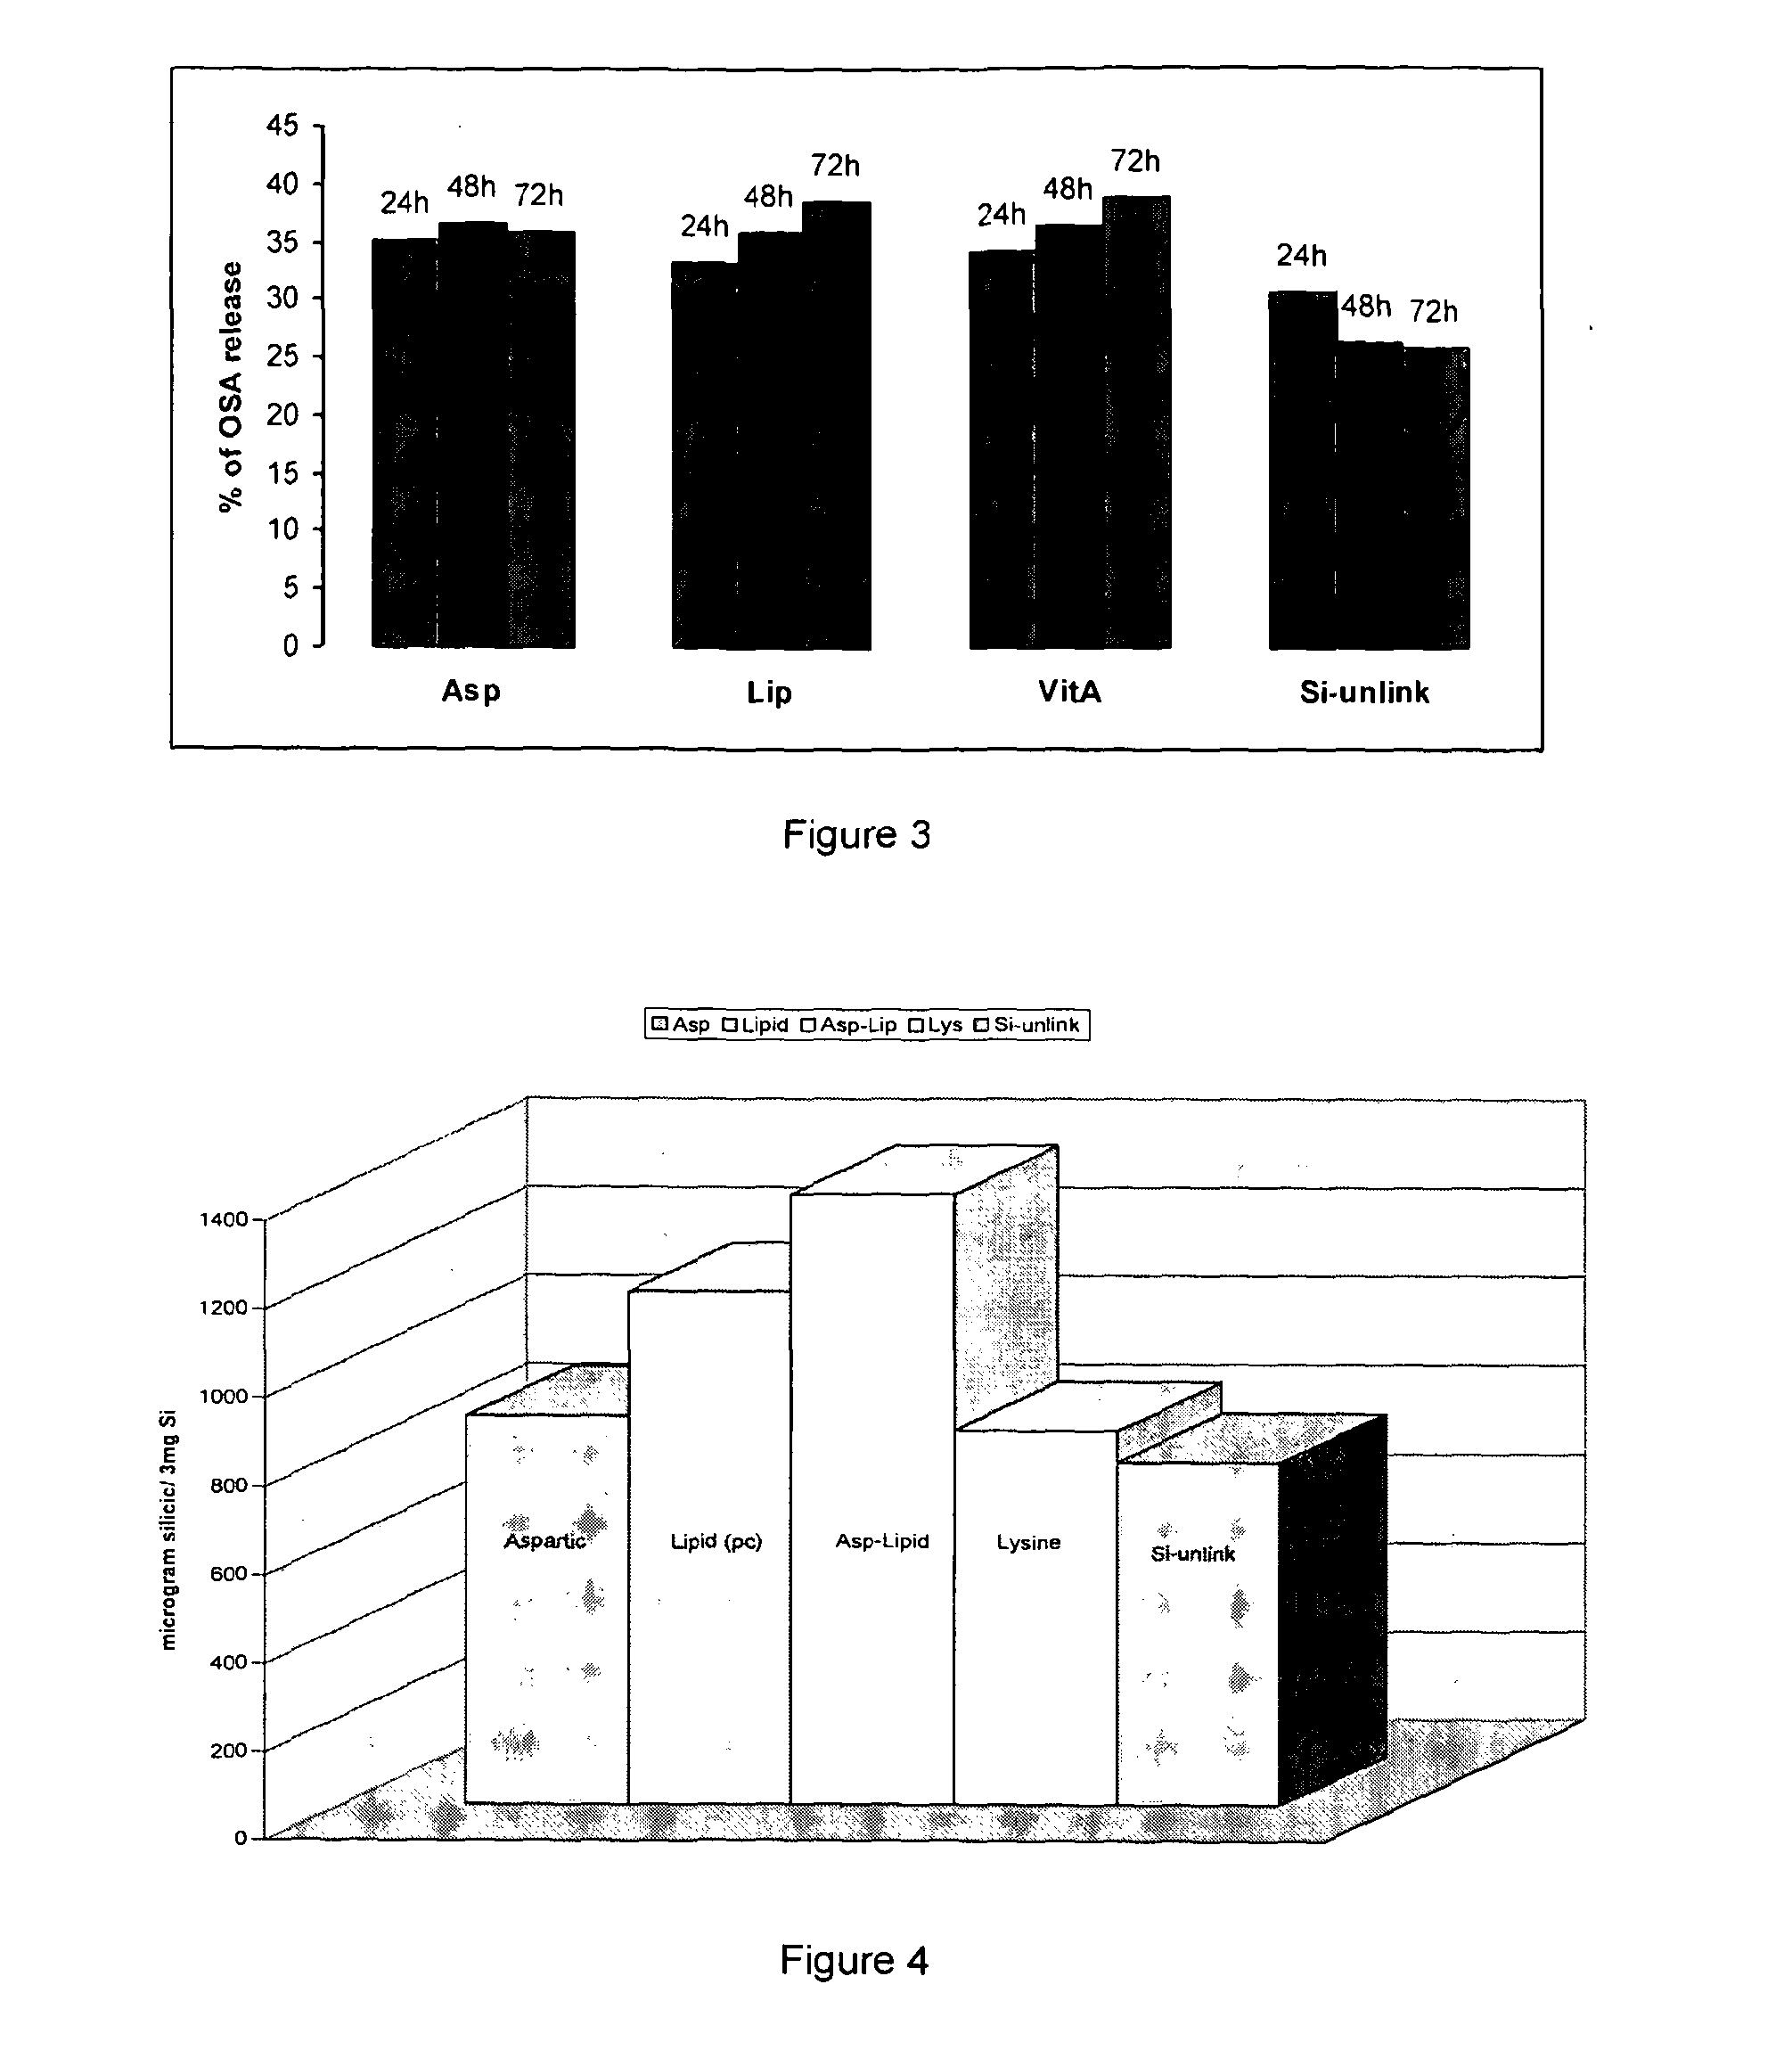 Delivery System Comprising A Silicon-Containing Material